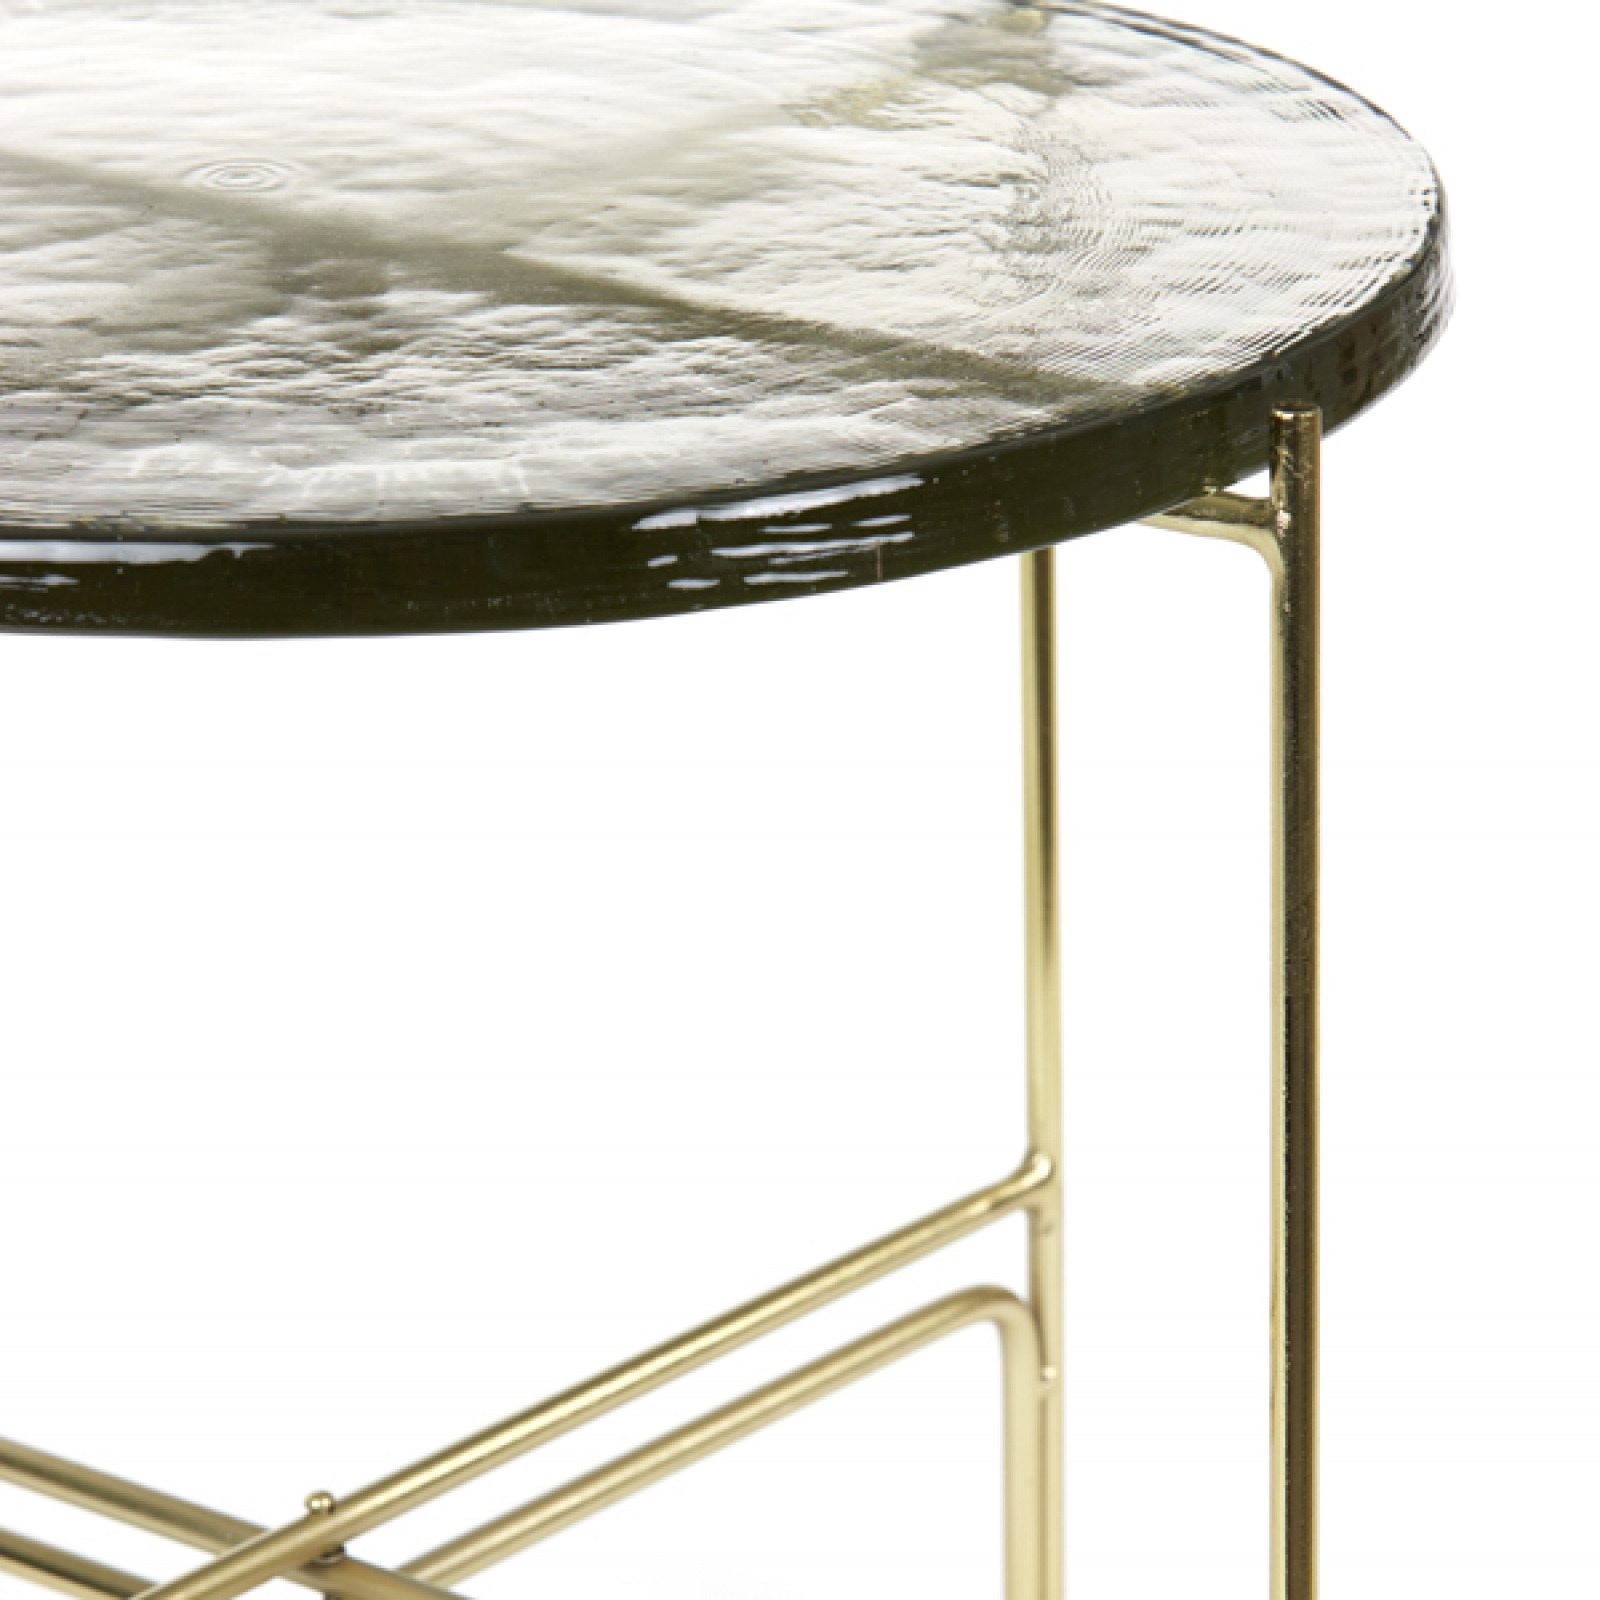 Canvo side table